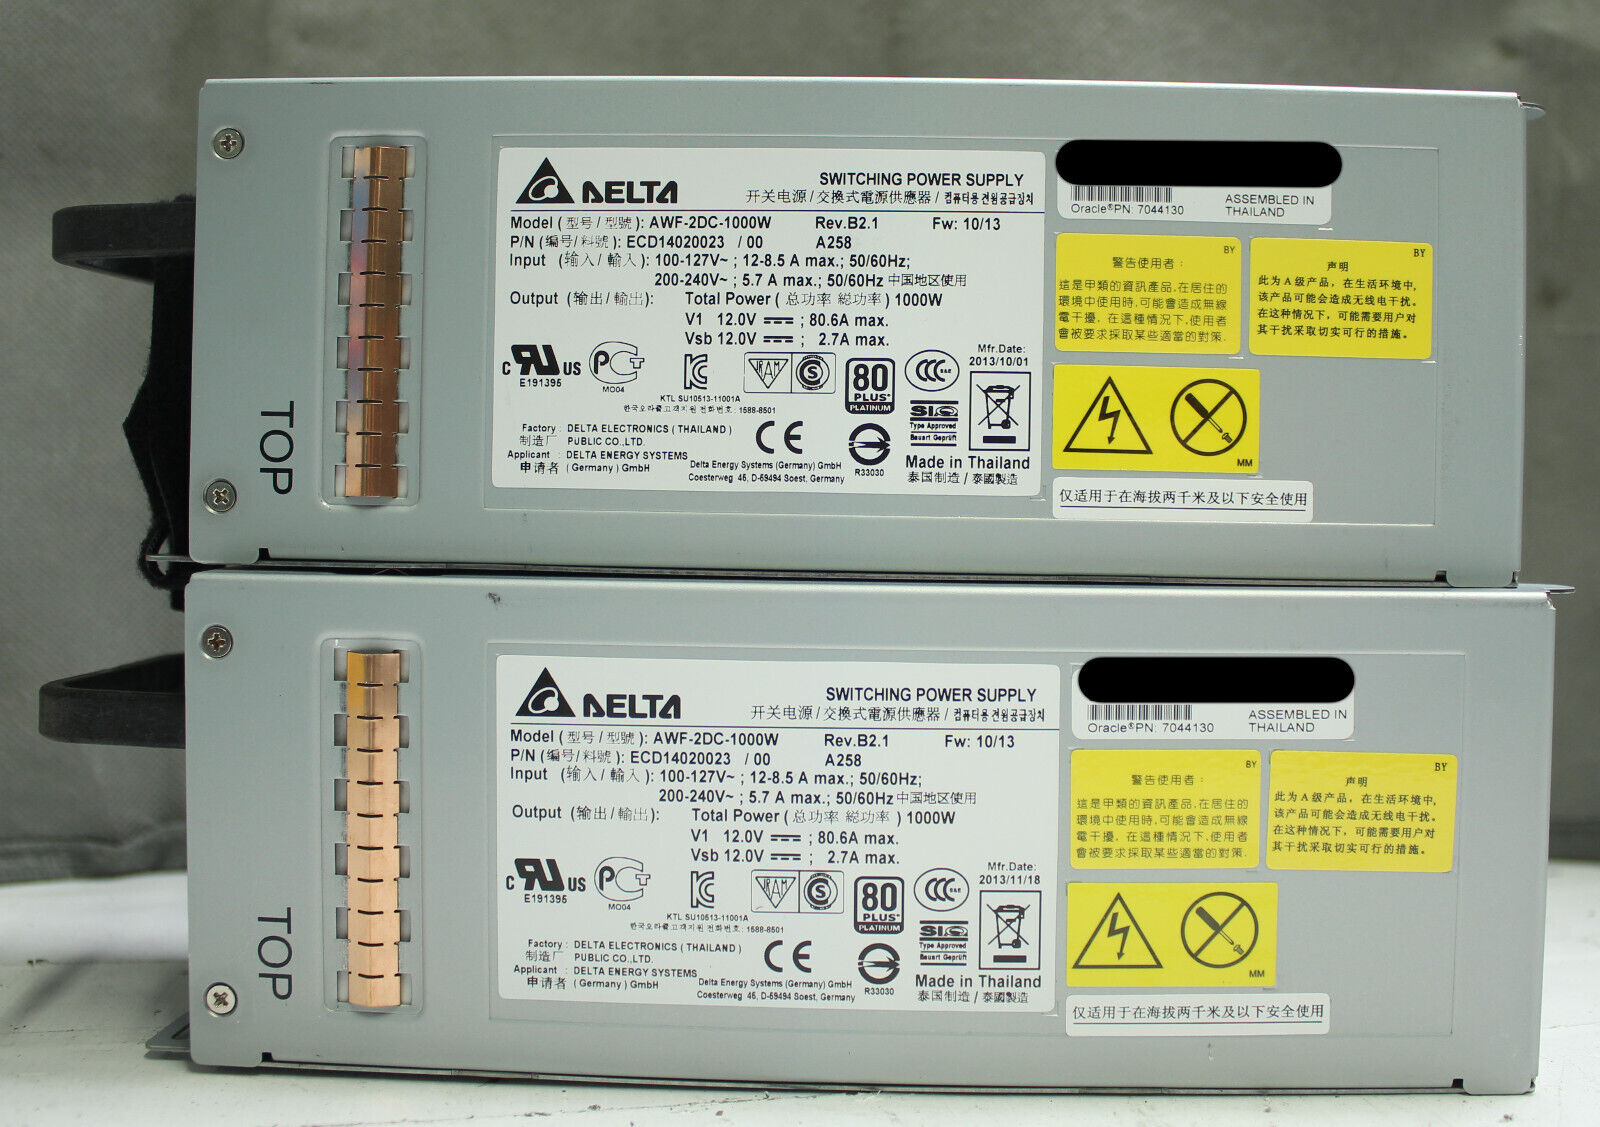 Lot of 2 SUN Oracle 7044130 Type A258 1000W AC Input Power Supply